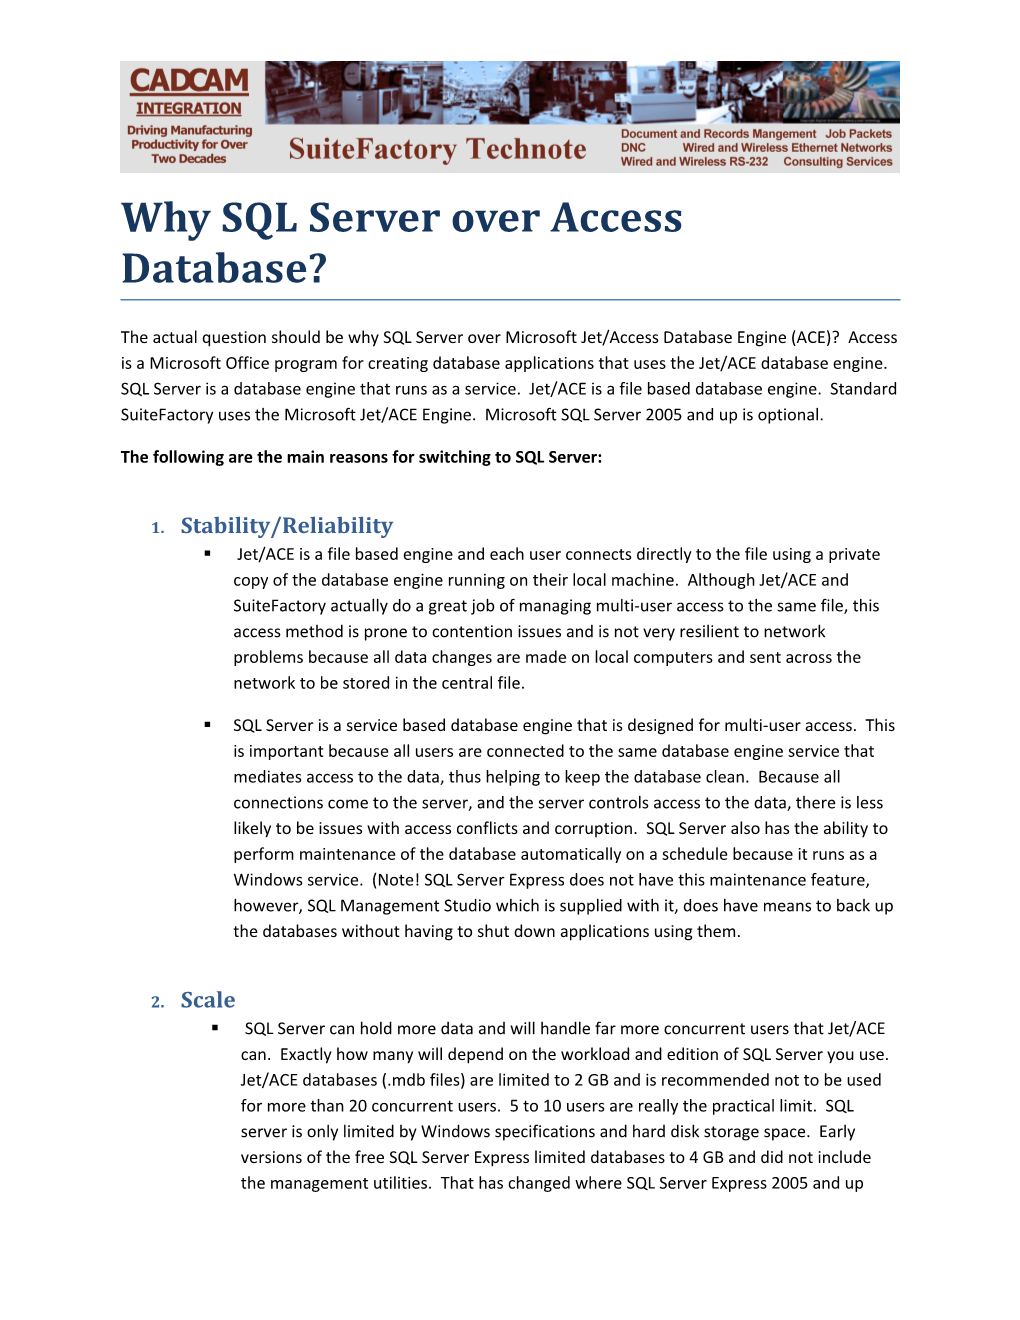 The Following Are the Main Reasons for Switching to SQL Server